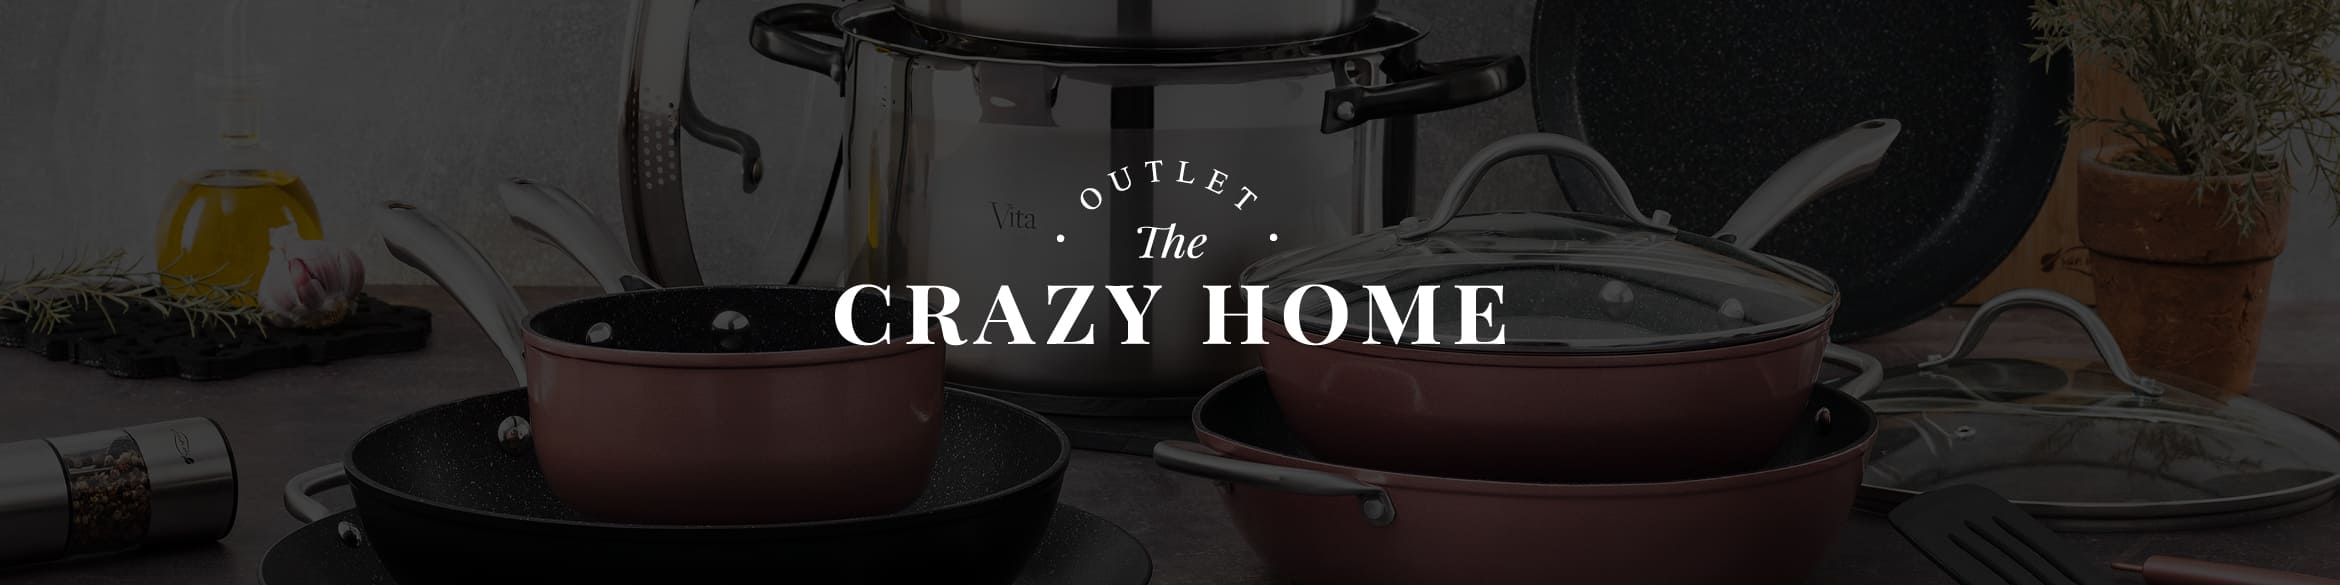 The Crazy Home Outlet store opens at La Torre Outlet Zaragoza